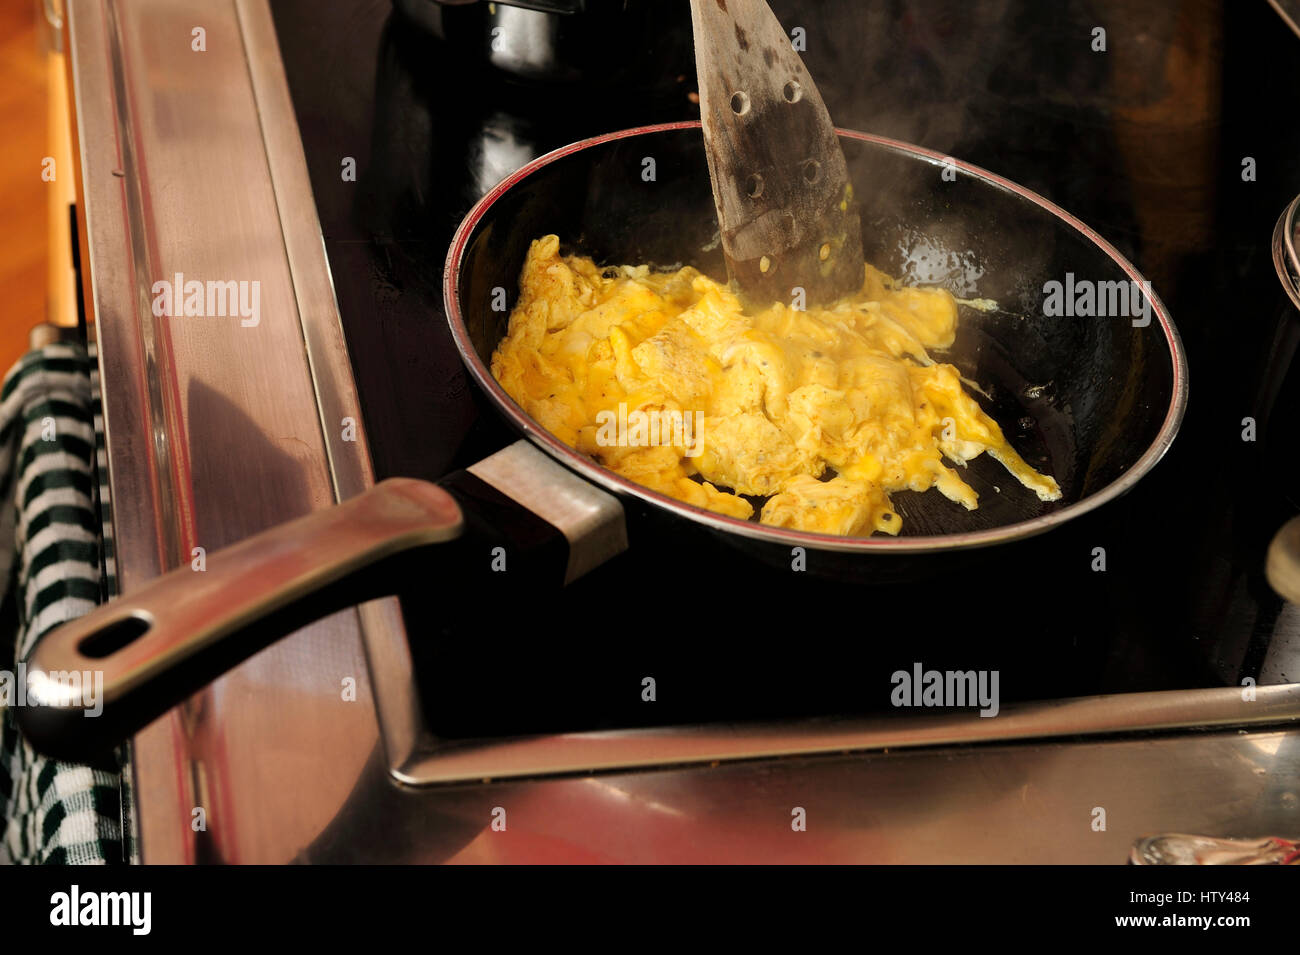 breakfast, scrambled eggs, frying, cooking, kitchen, stove, eggs, protein, proteins, frying pan, hot, warm, meal, Stock Photo